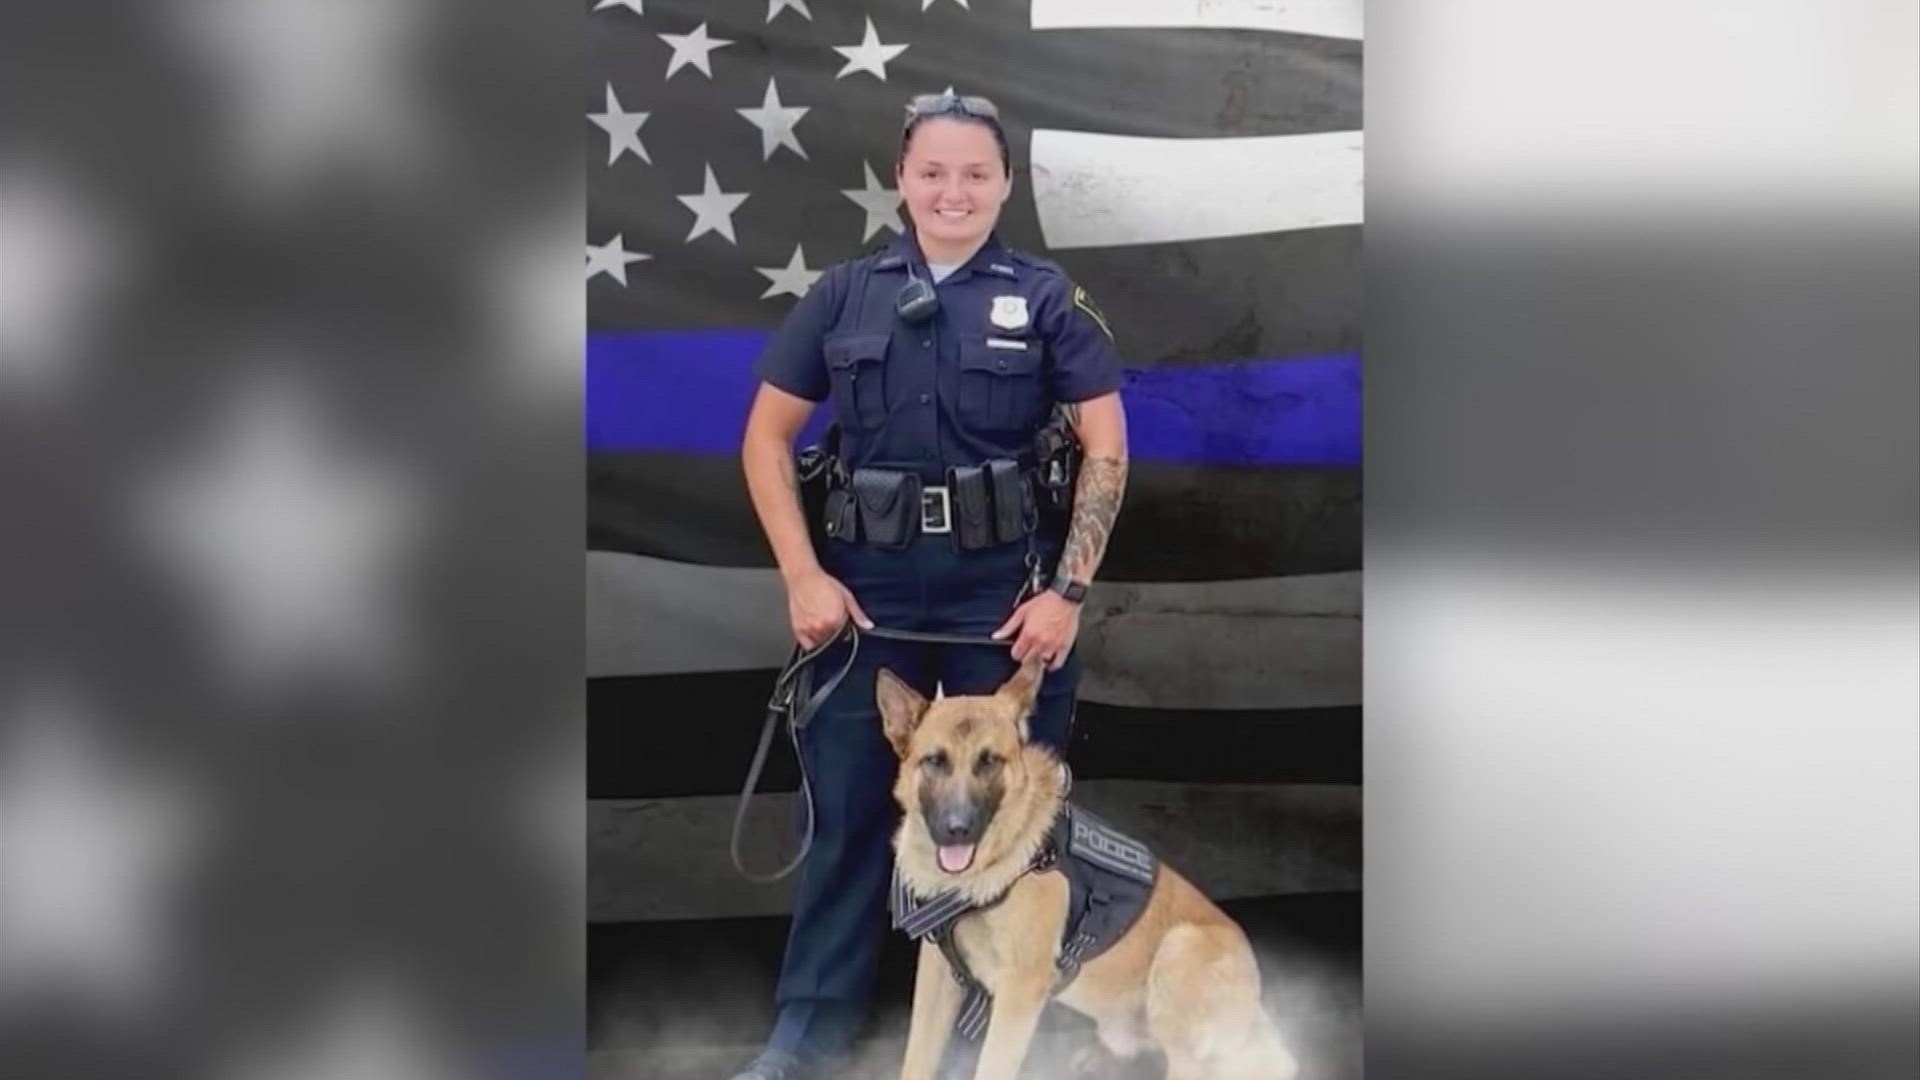 Officer Seara Burton was injured less than two weeks before her wedding, when a suspect shot her at a traffic stop.